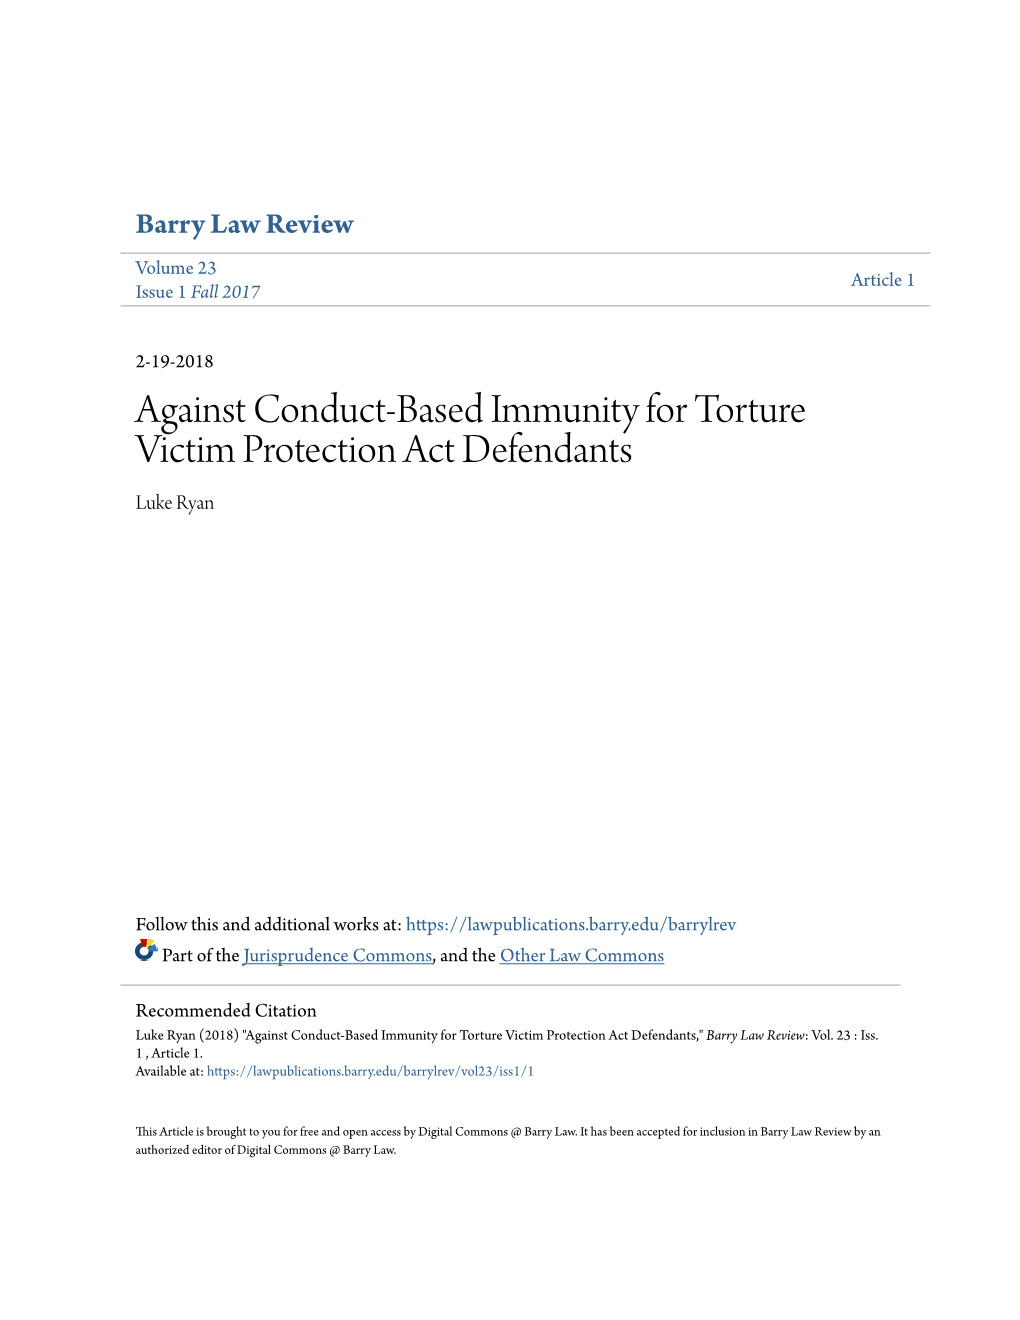 Against Conduct-Based Immunity for Torture Victim Protection Act Defendants Luke Ryan